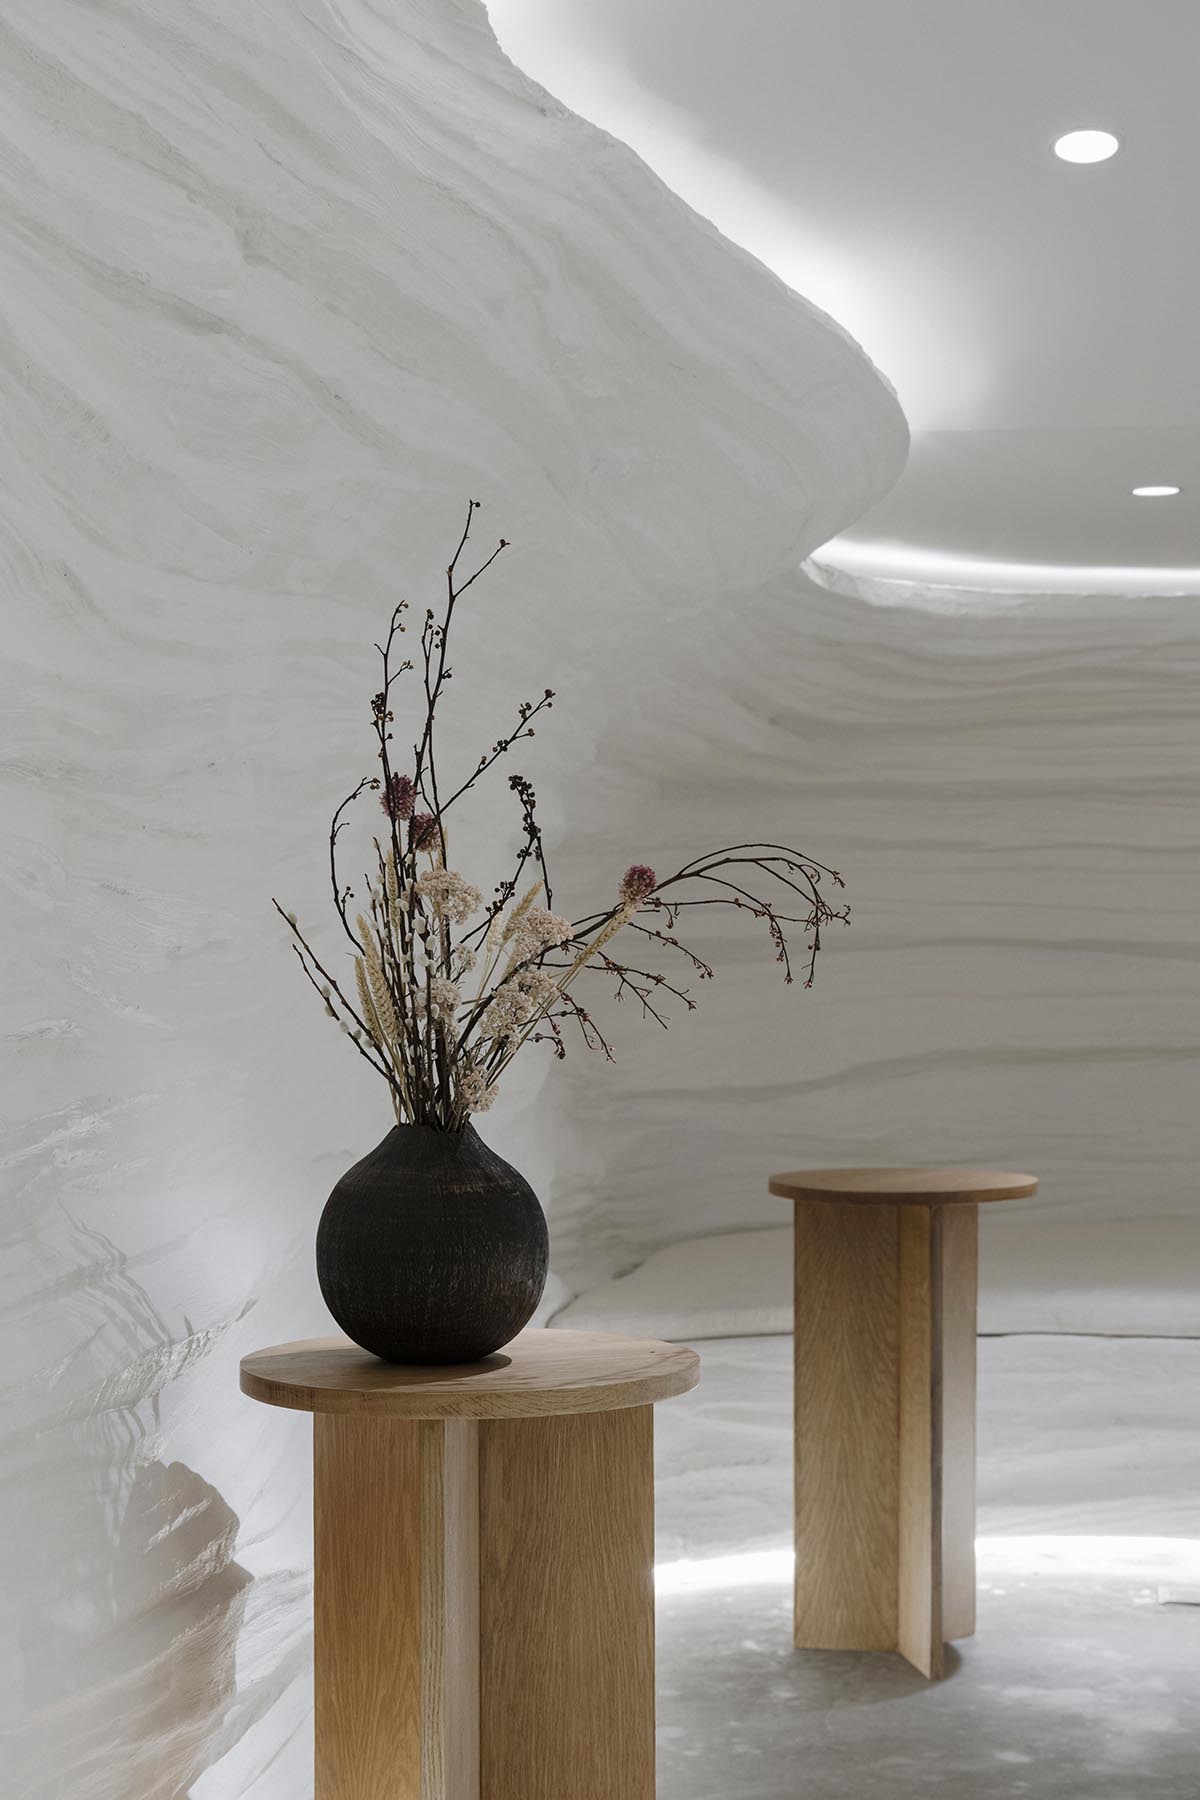 Juti architects creates surreal atmosphere for tea house within cave-like and textured walls 